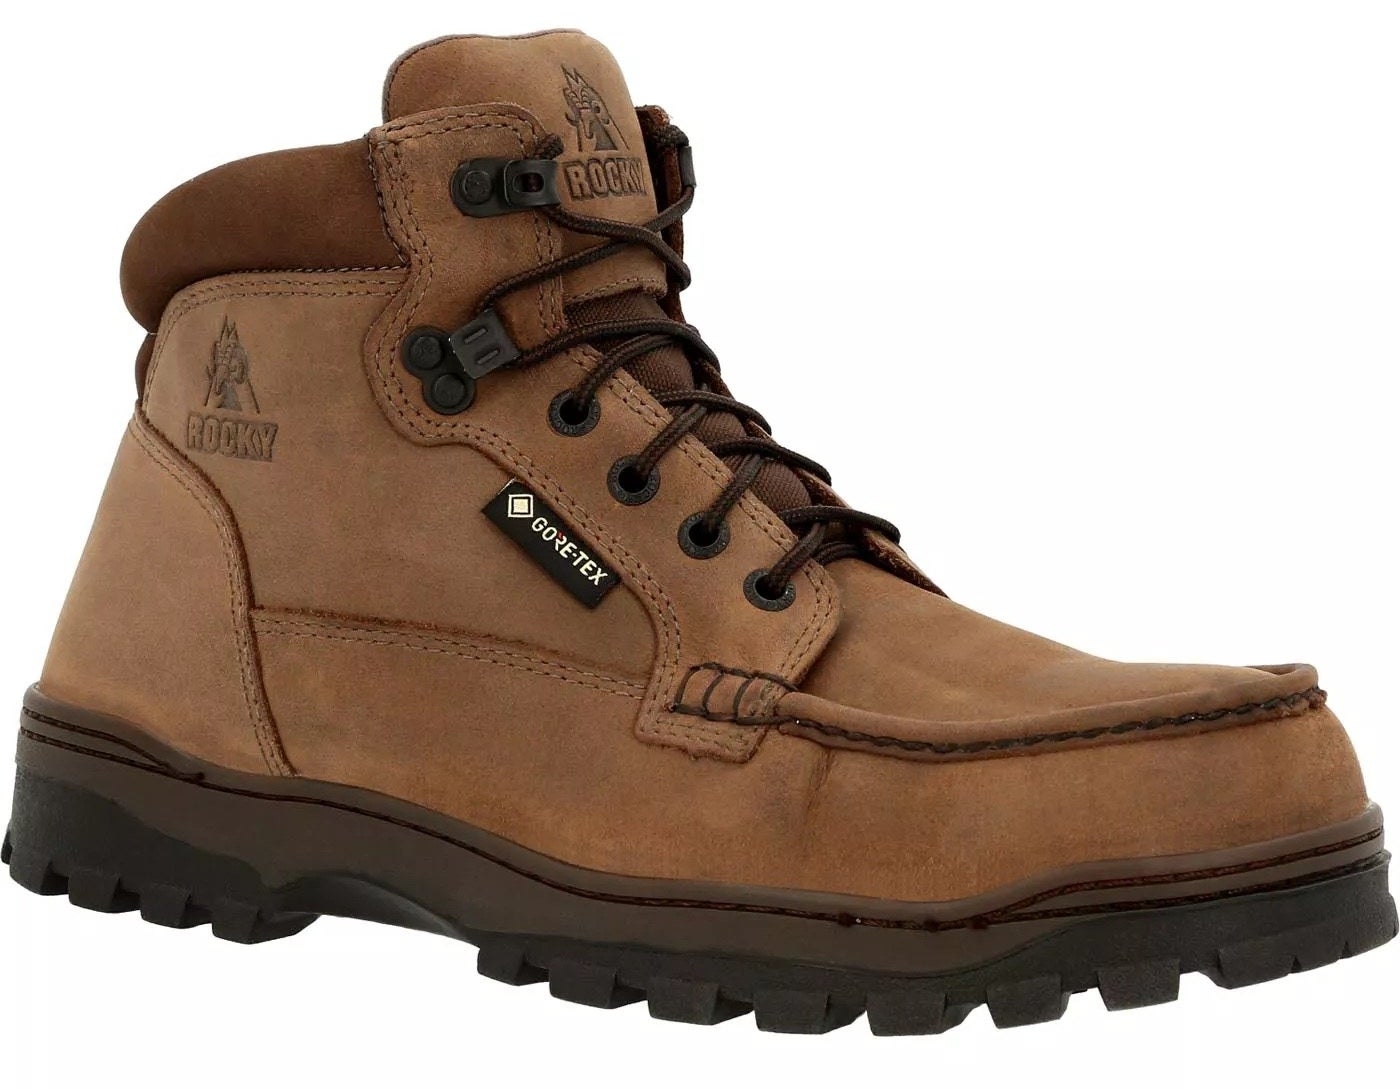 Work boots in light brown